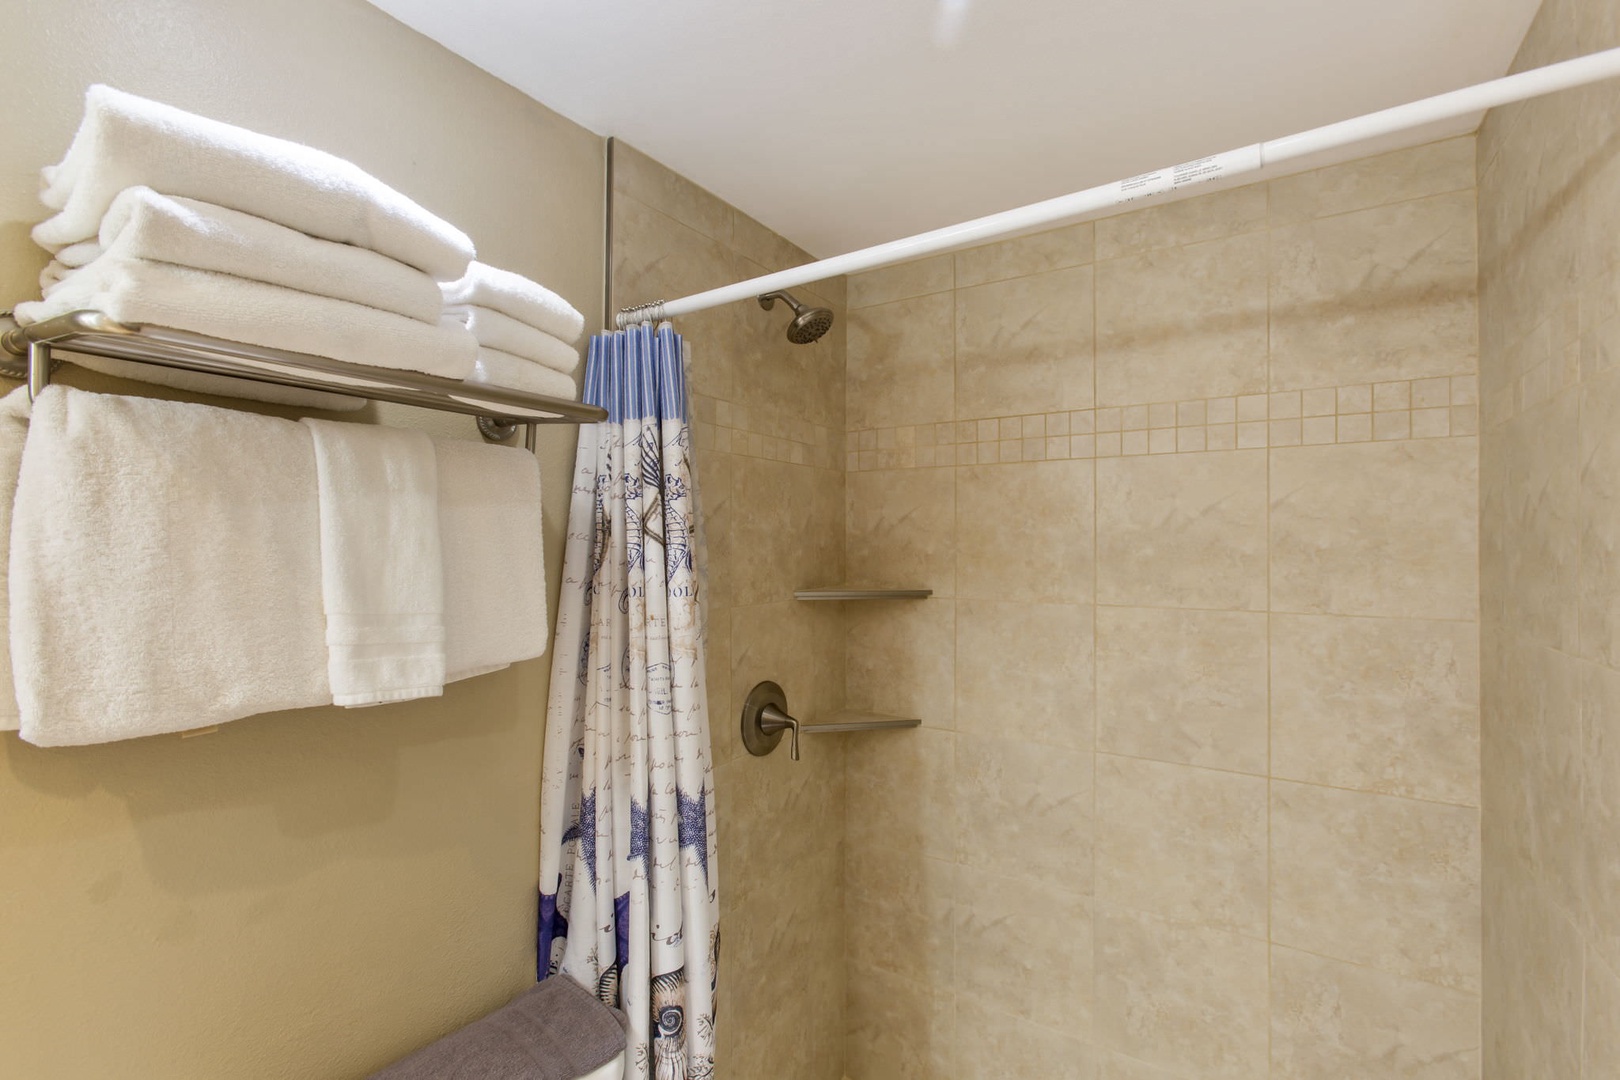 Full bathroom with stand up shower